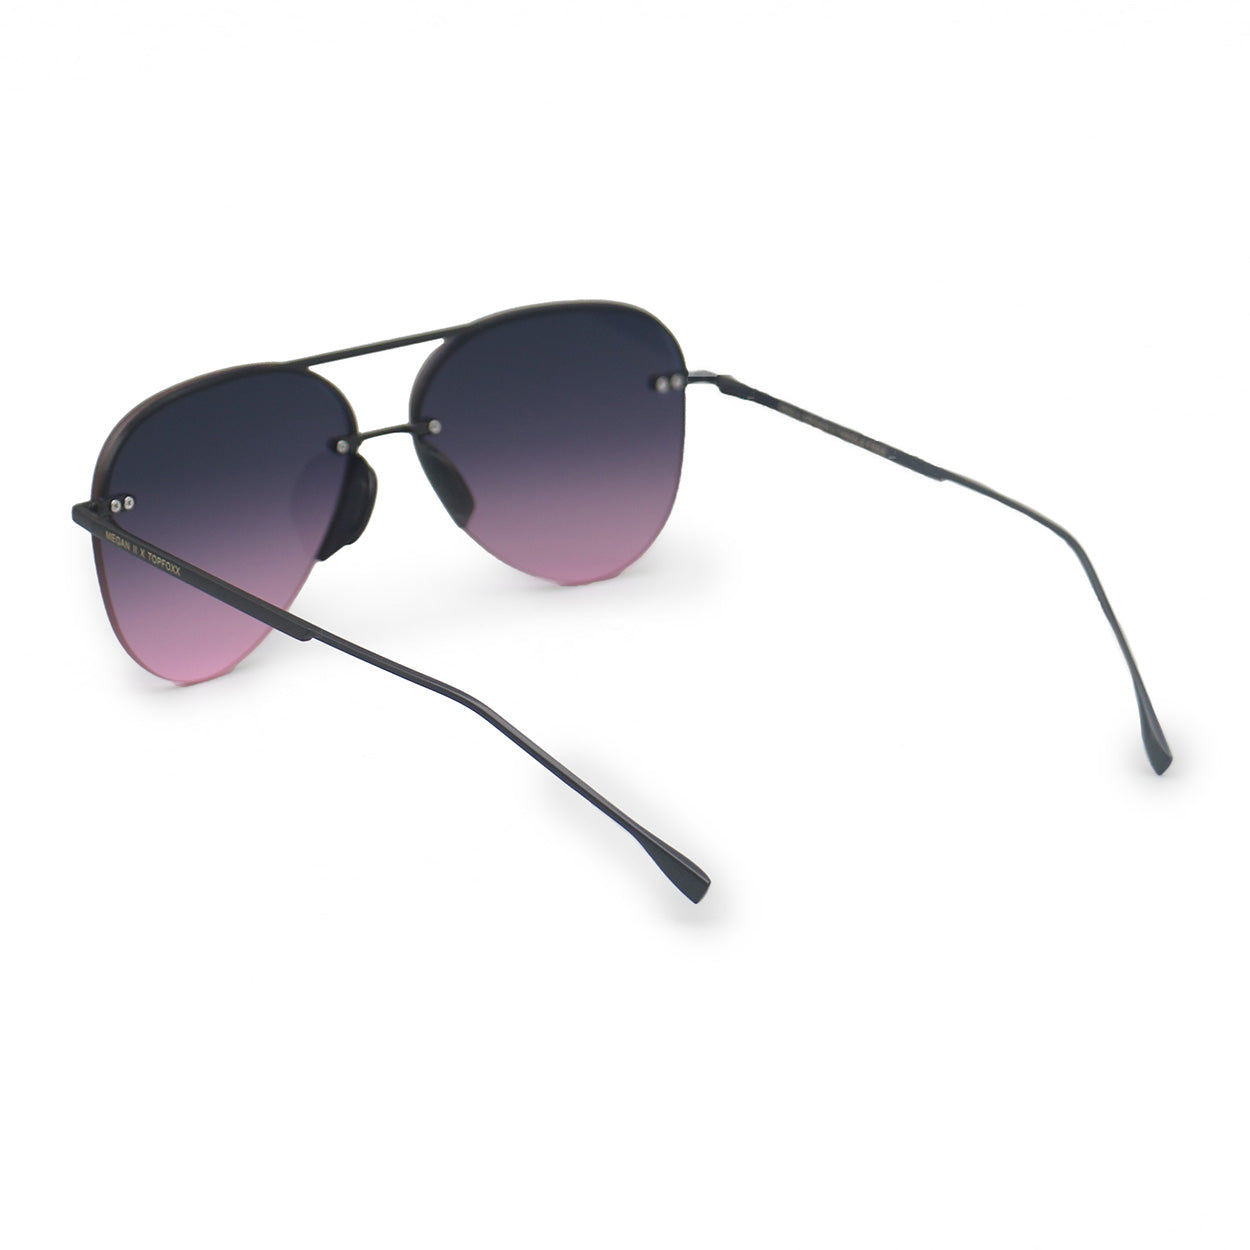 White background back image of classic aviators with no nosepad and faded purple pink lenses with metal detailing